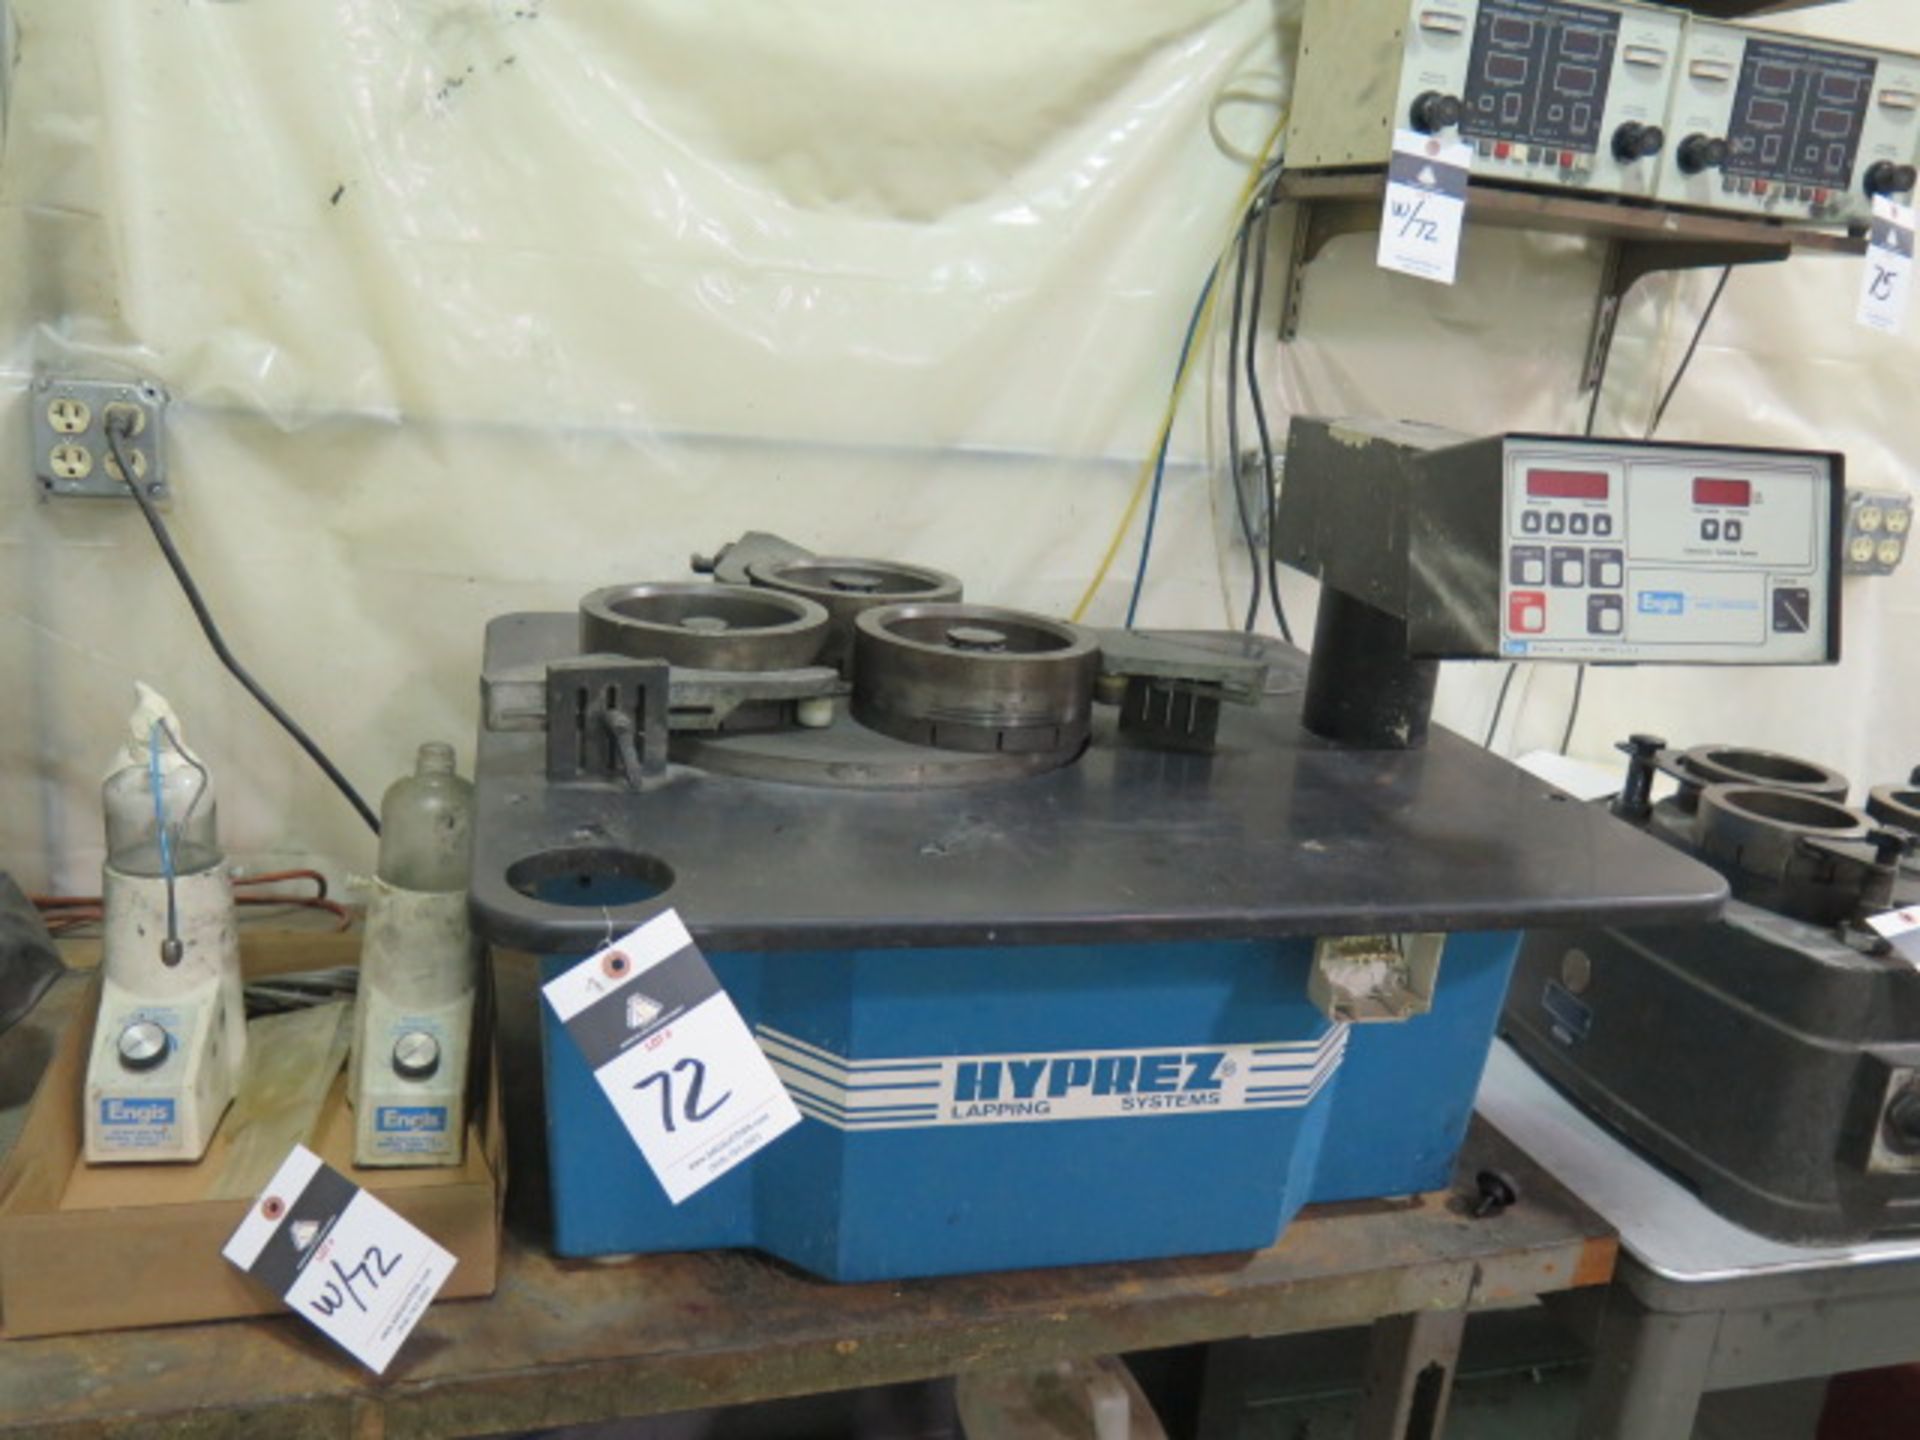 Engis Corp “Hyprex Lapping System” s/n 726LM15 w/ Engis Digital Controls, 15” Lapping Plate,